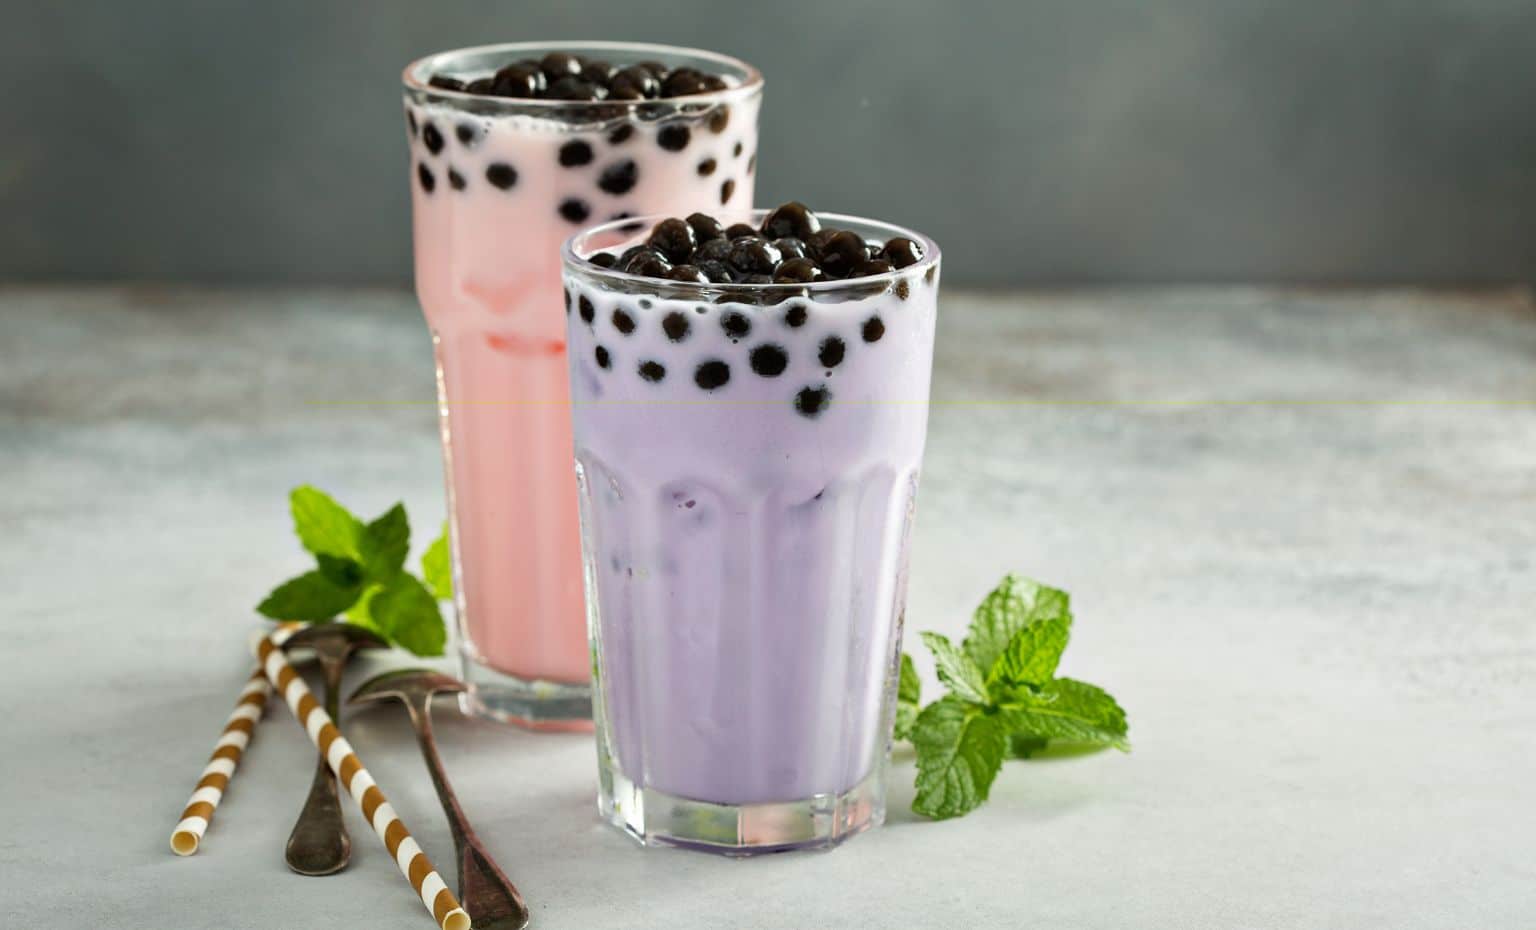 A Brief Overview of Bubble Tea